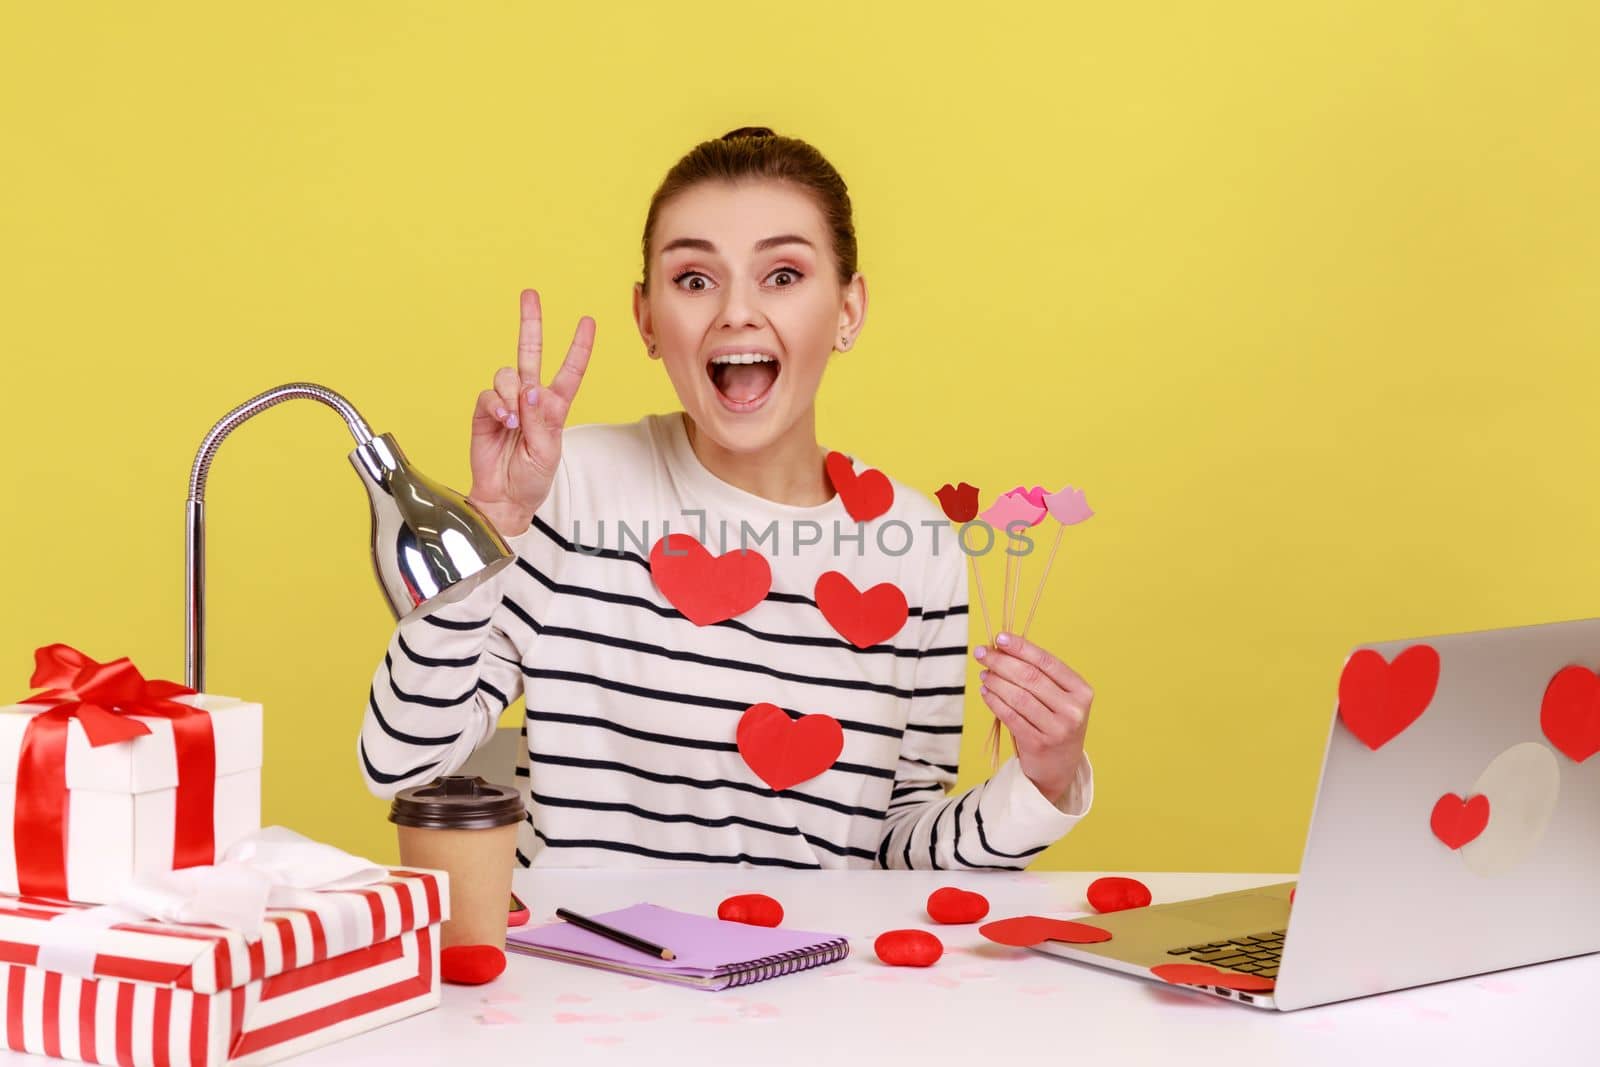 Funny excited festive woman office manager sitting on workplace with pout lips, holding party props, showing v sign, looking at camera. Indoor studio studio shot isolated on yellow background.